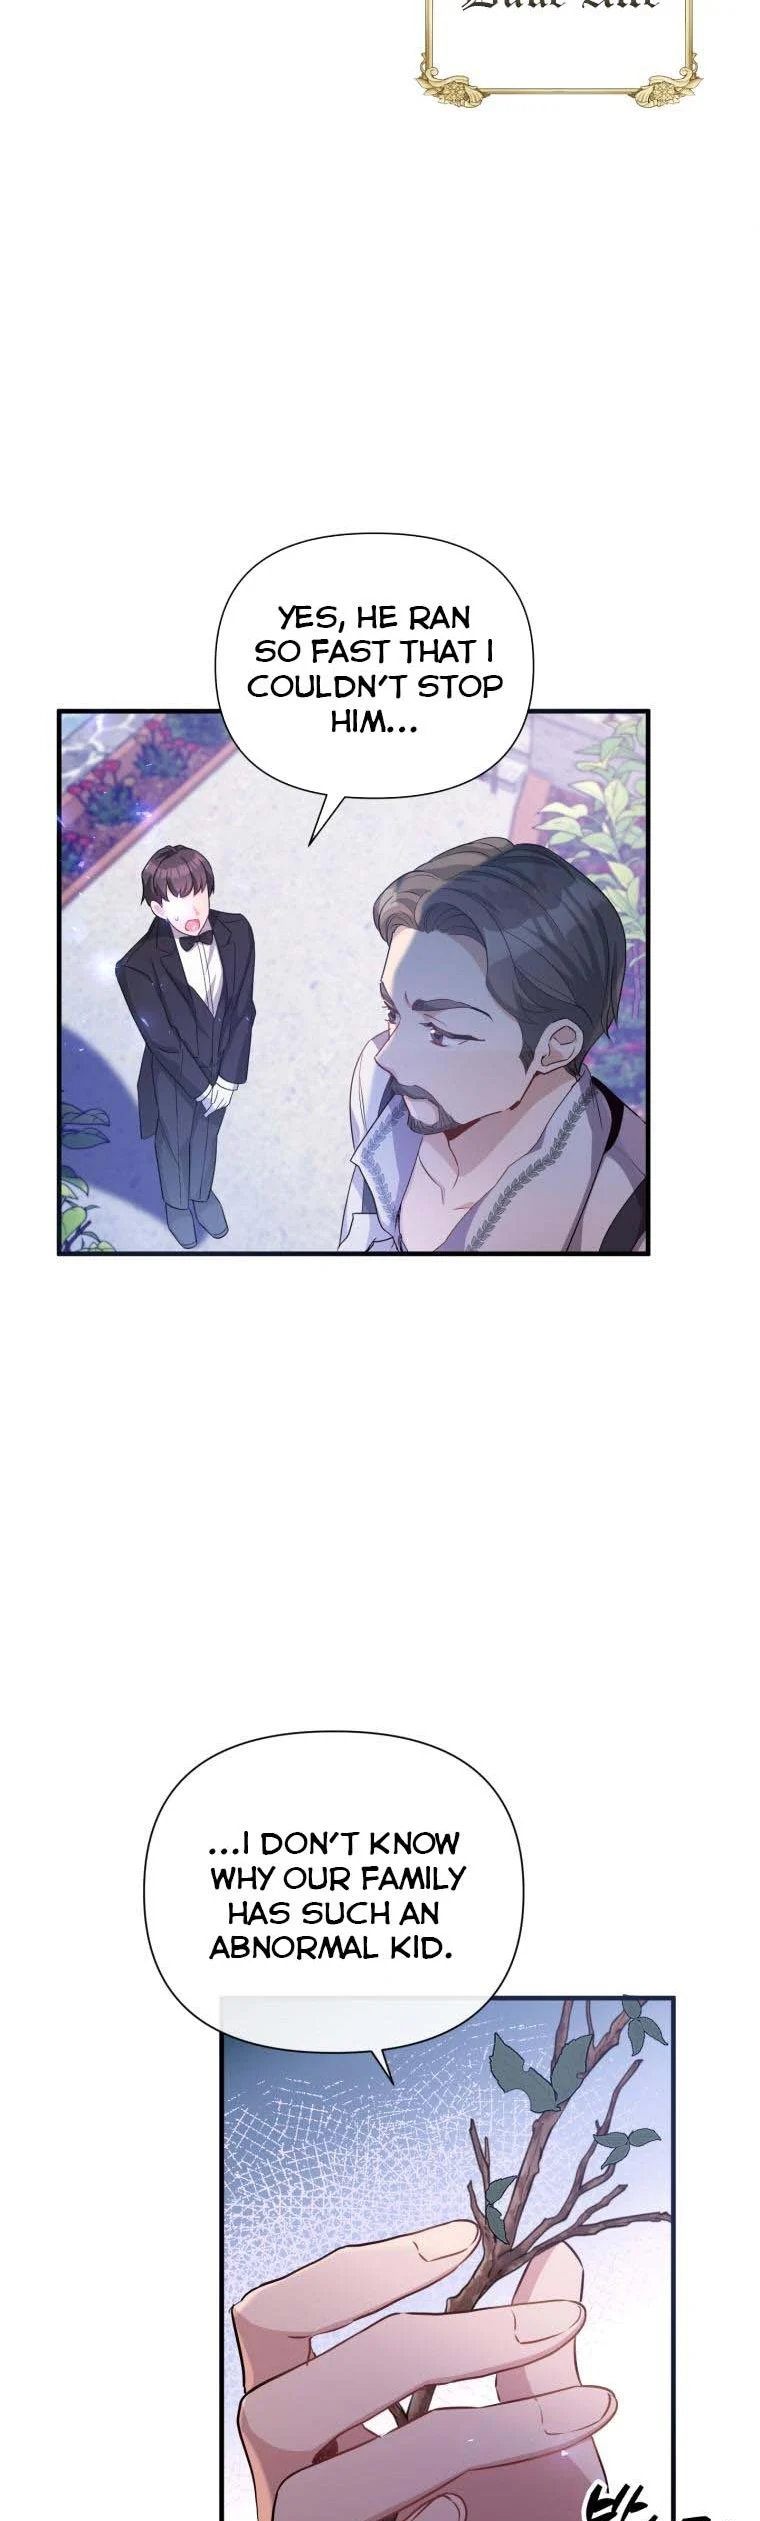 Marriage B chapter 49